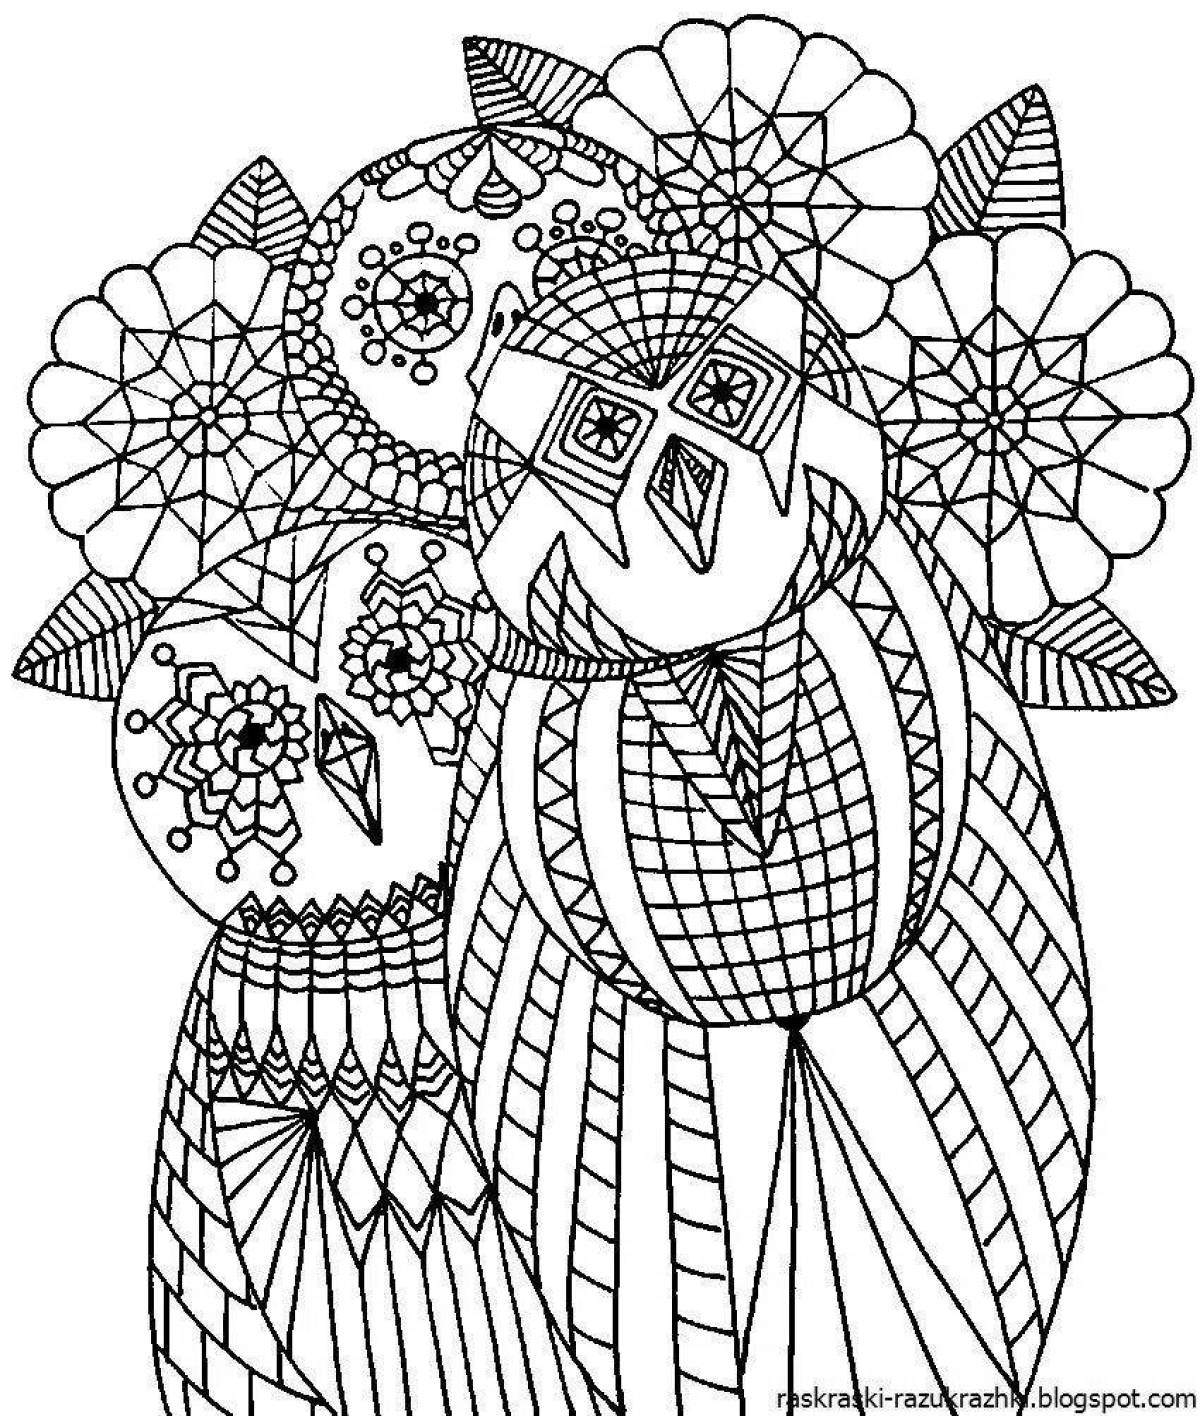 Relaxing coloring book for adults and children